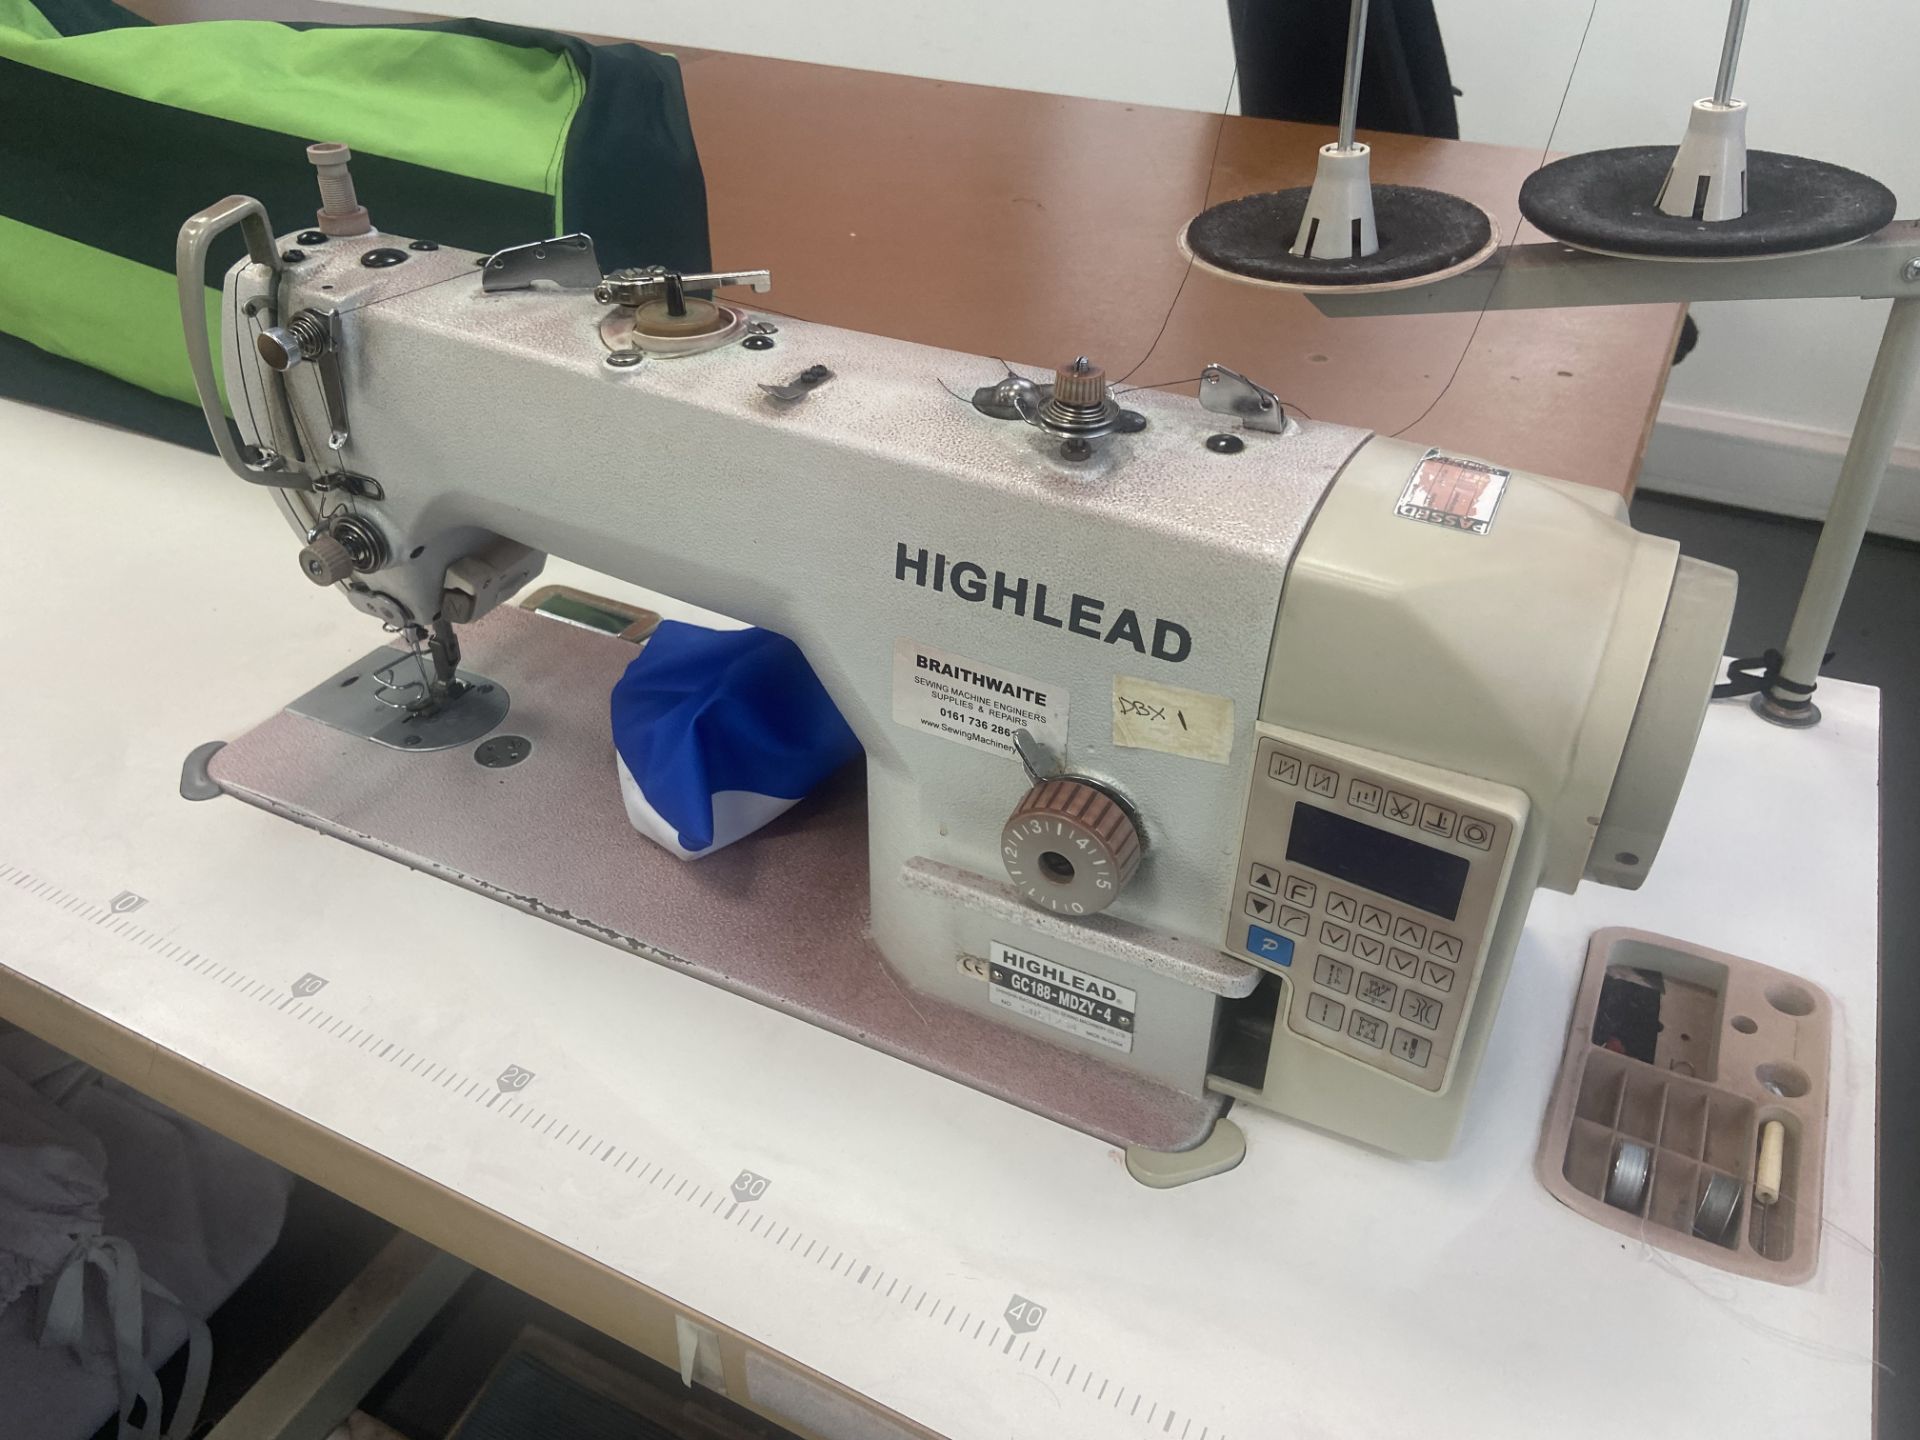 Highlead GC188-MDZY-4 Lockstitch Sewing Machine, serial no. 5051234, with fitted pedal operated - Image 2 of 6